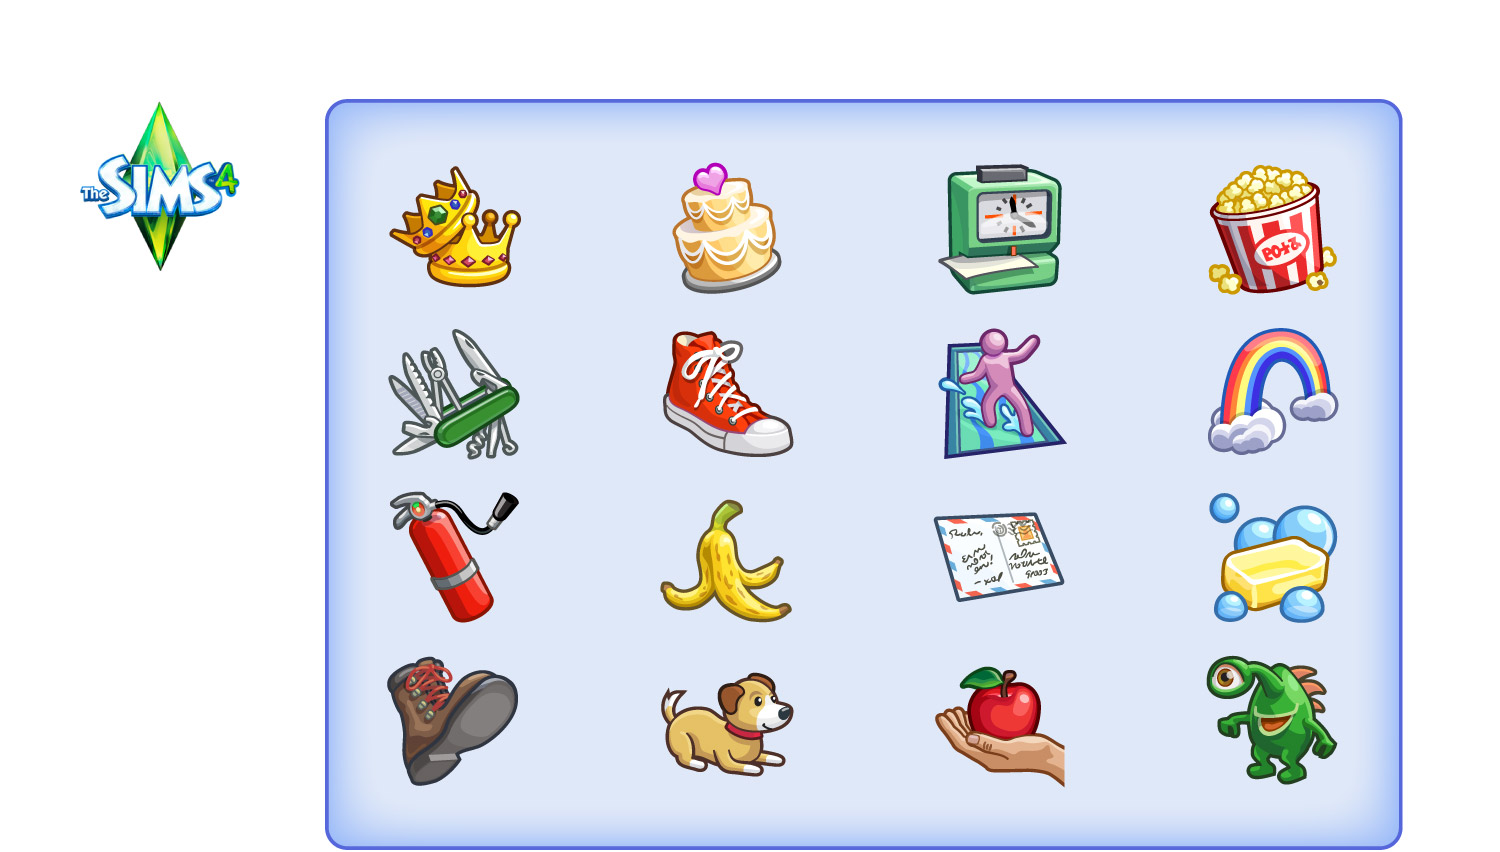 Icons for EA Games' Sims4